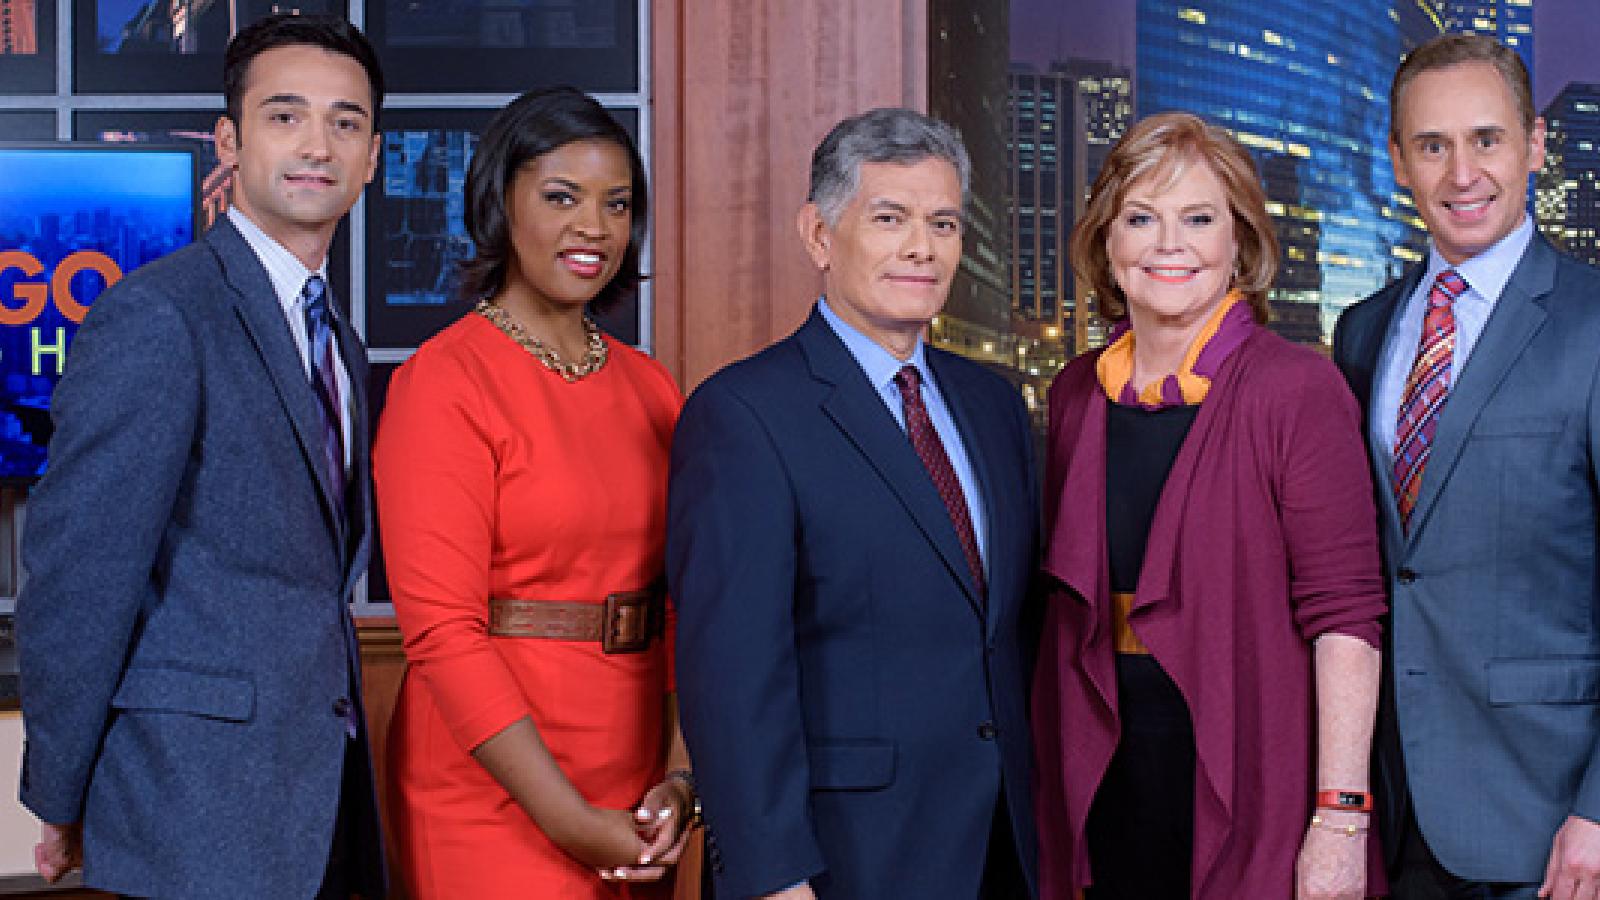 Chicago Tonight Viewing Party at WTTW Studios | WTTW Chicago